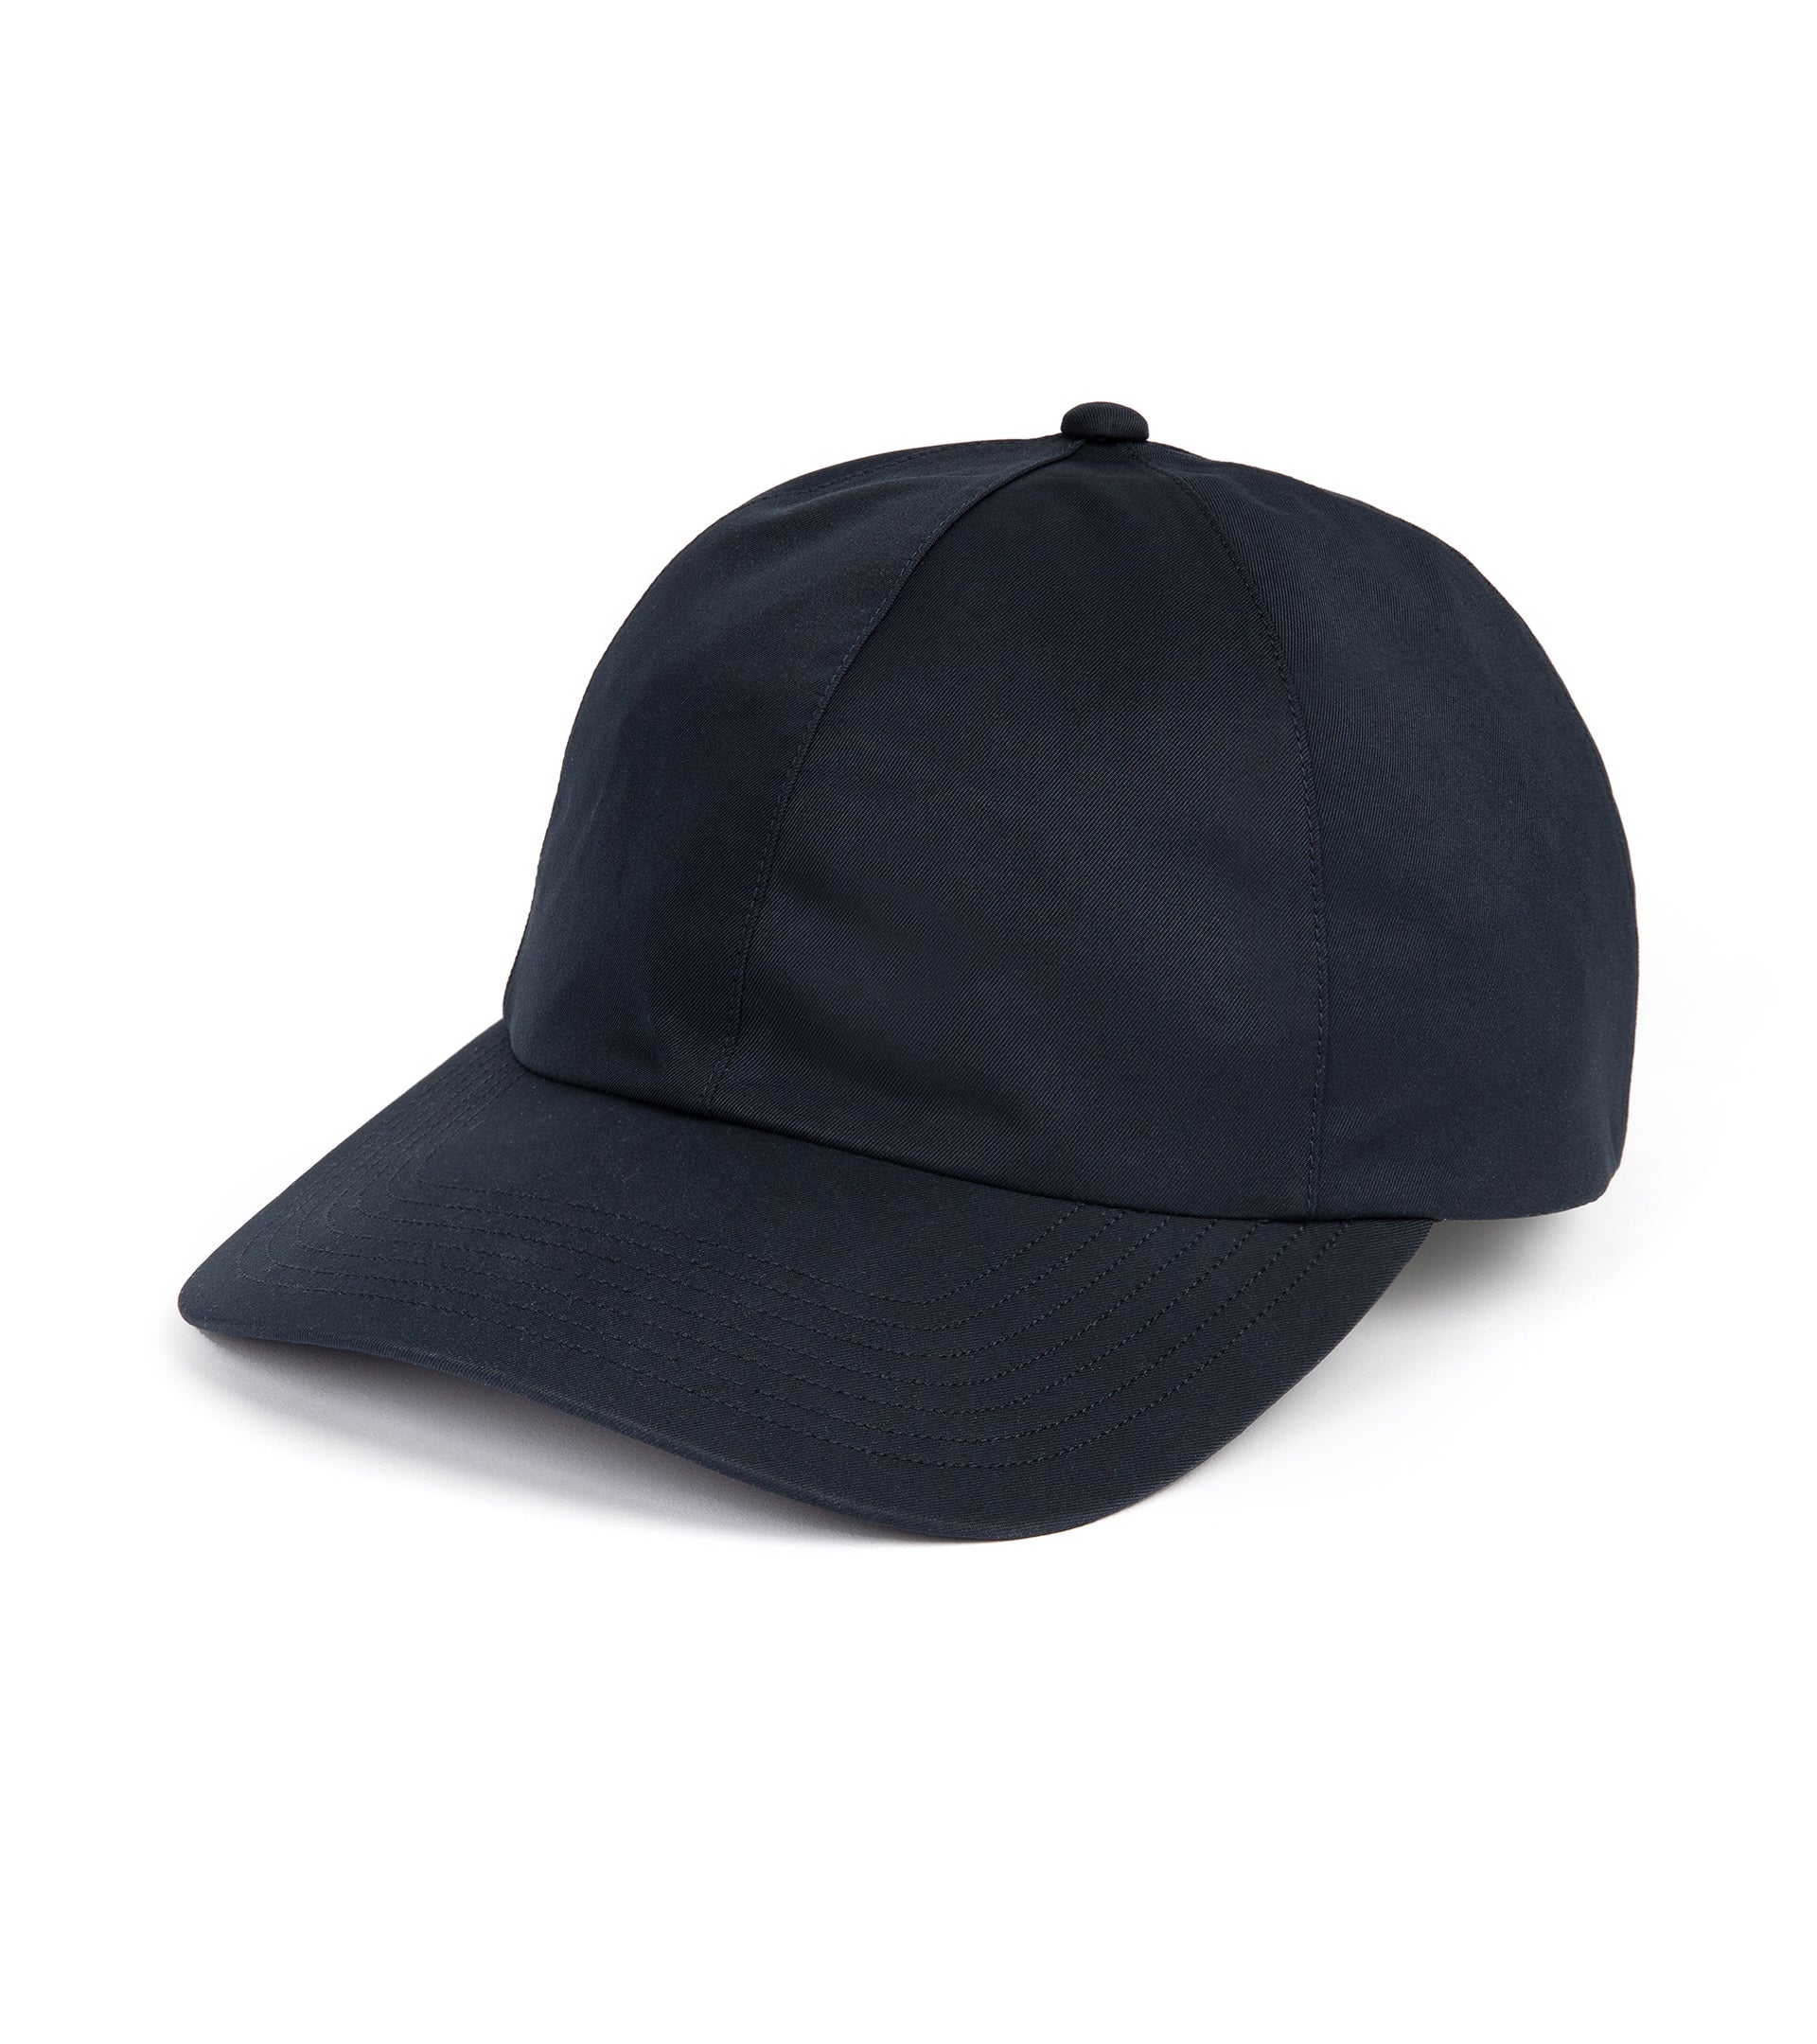 06.

GORE-TEX Cap from Na...